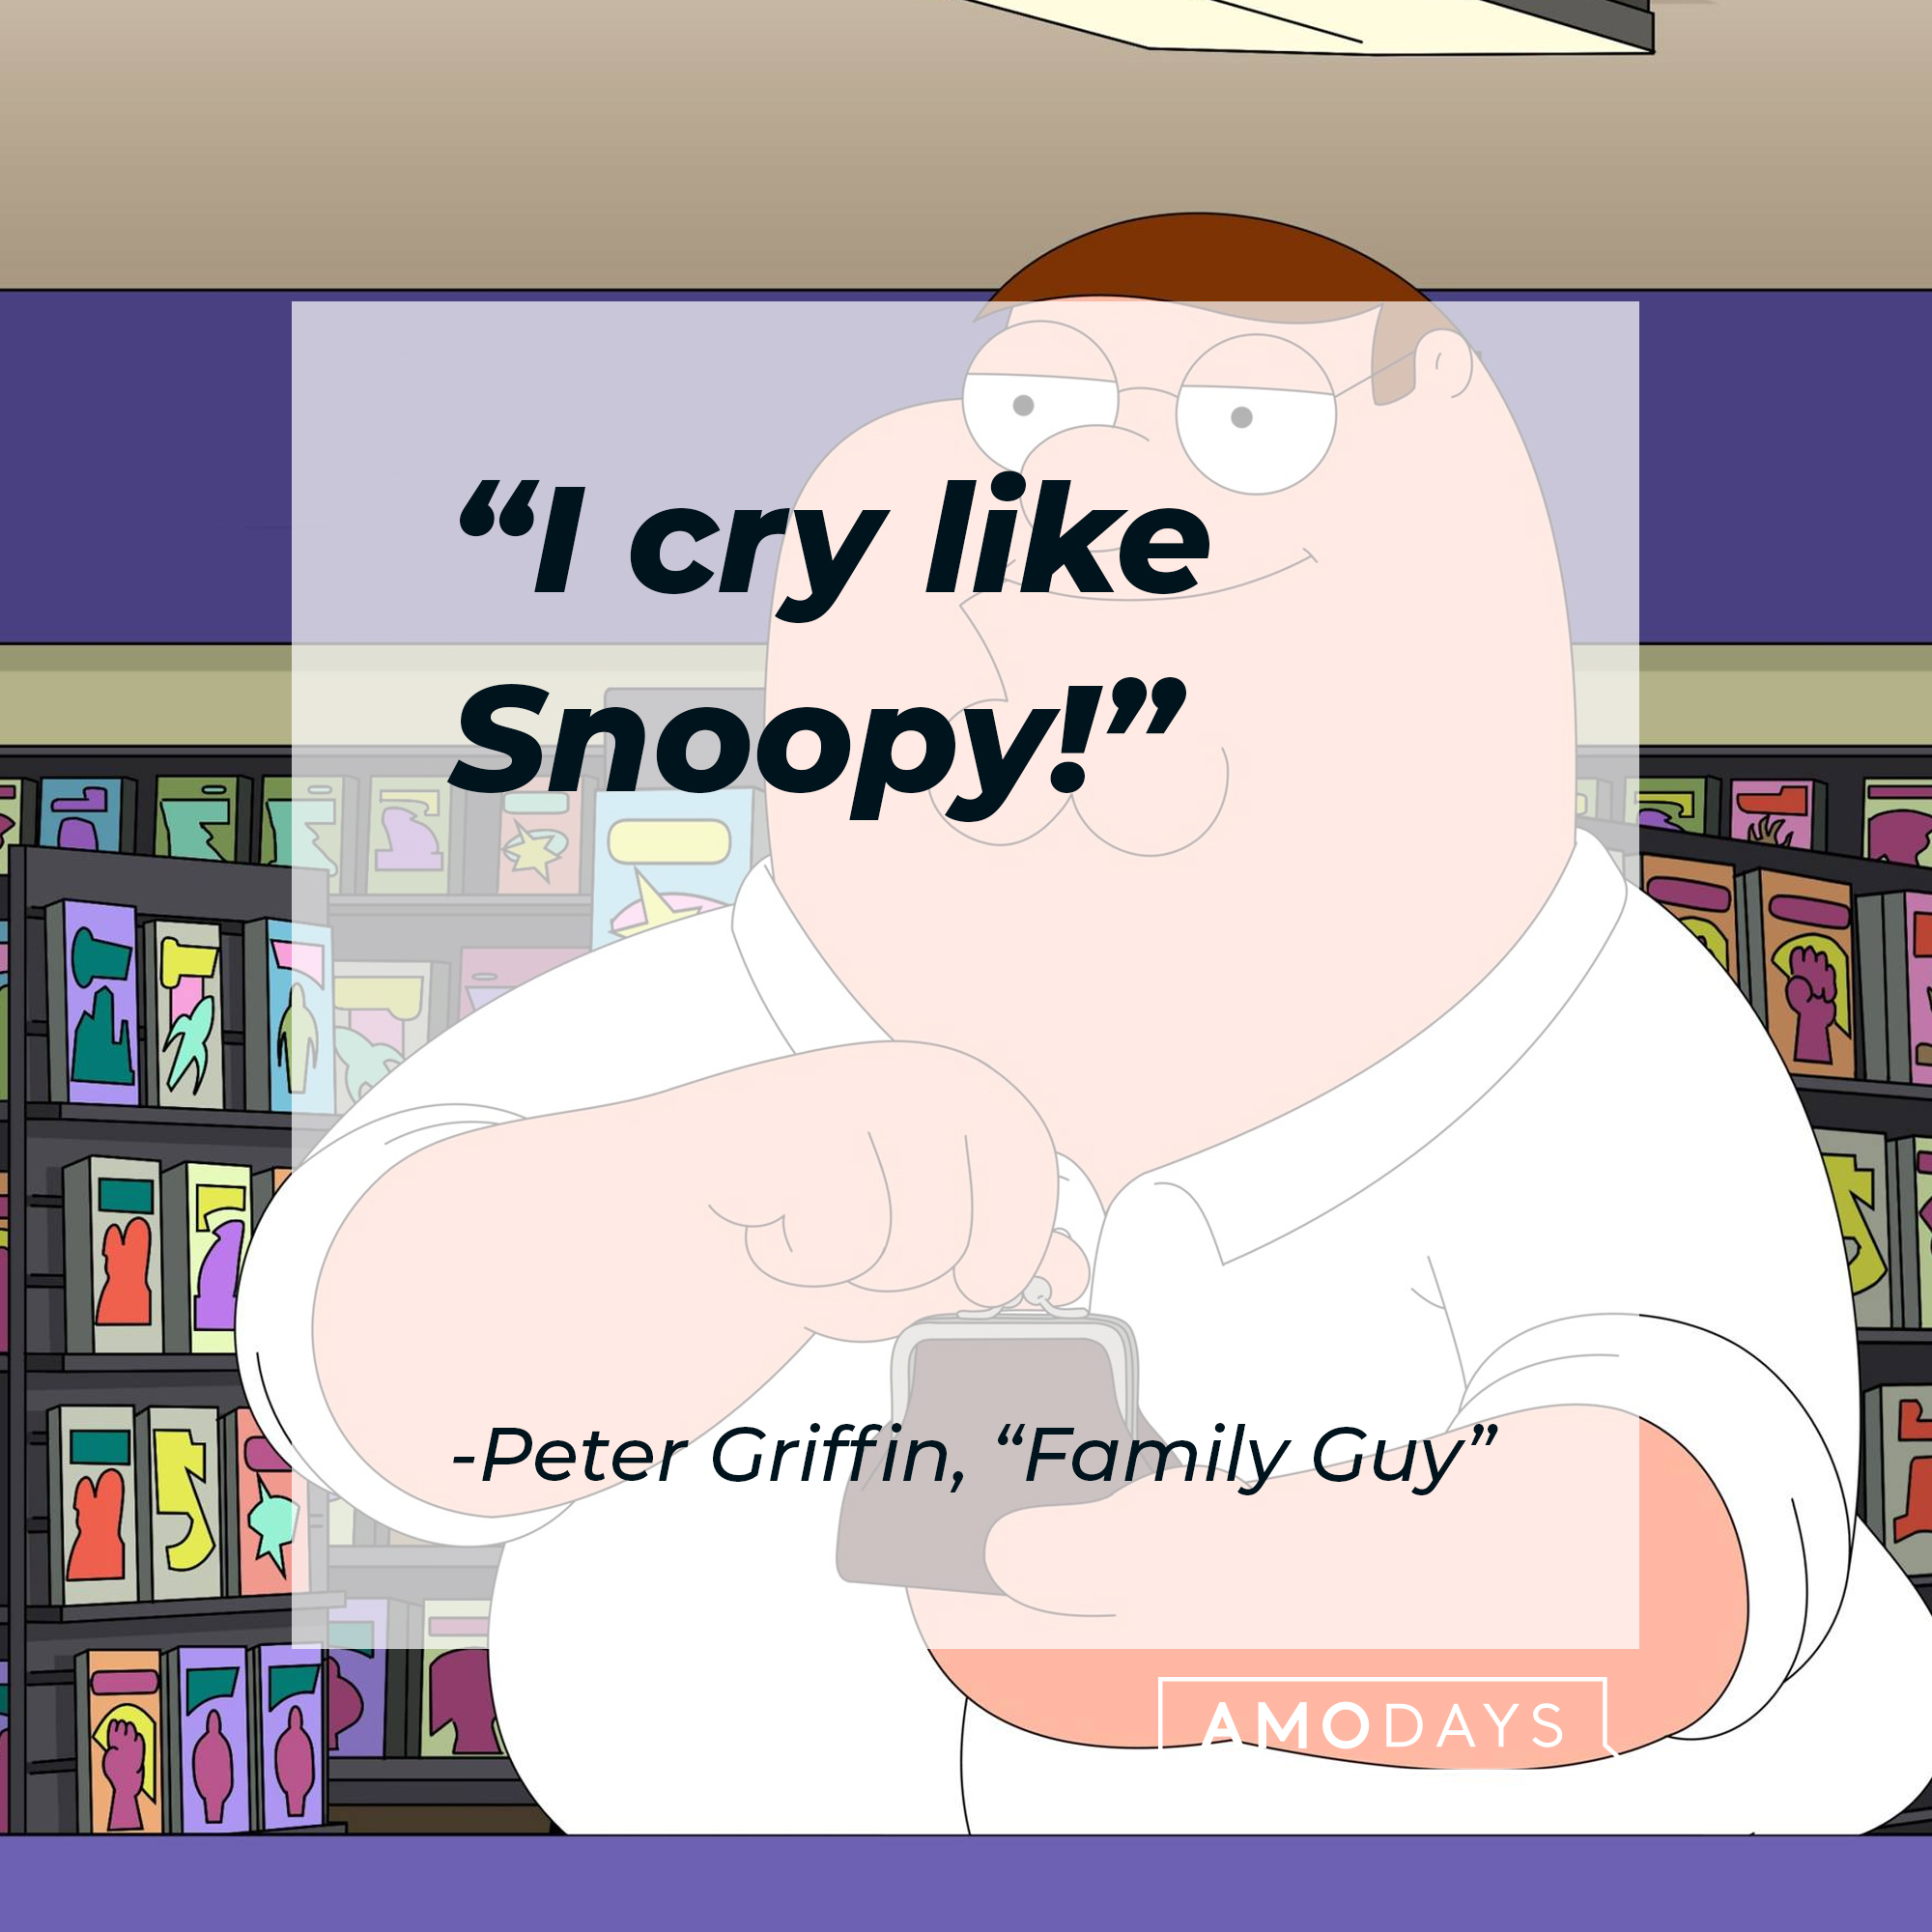 Peter Griffin's quote: "I cry like Snoopy!" | Source: facebook.com/FamilyGuy